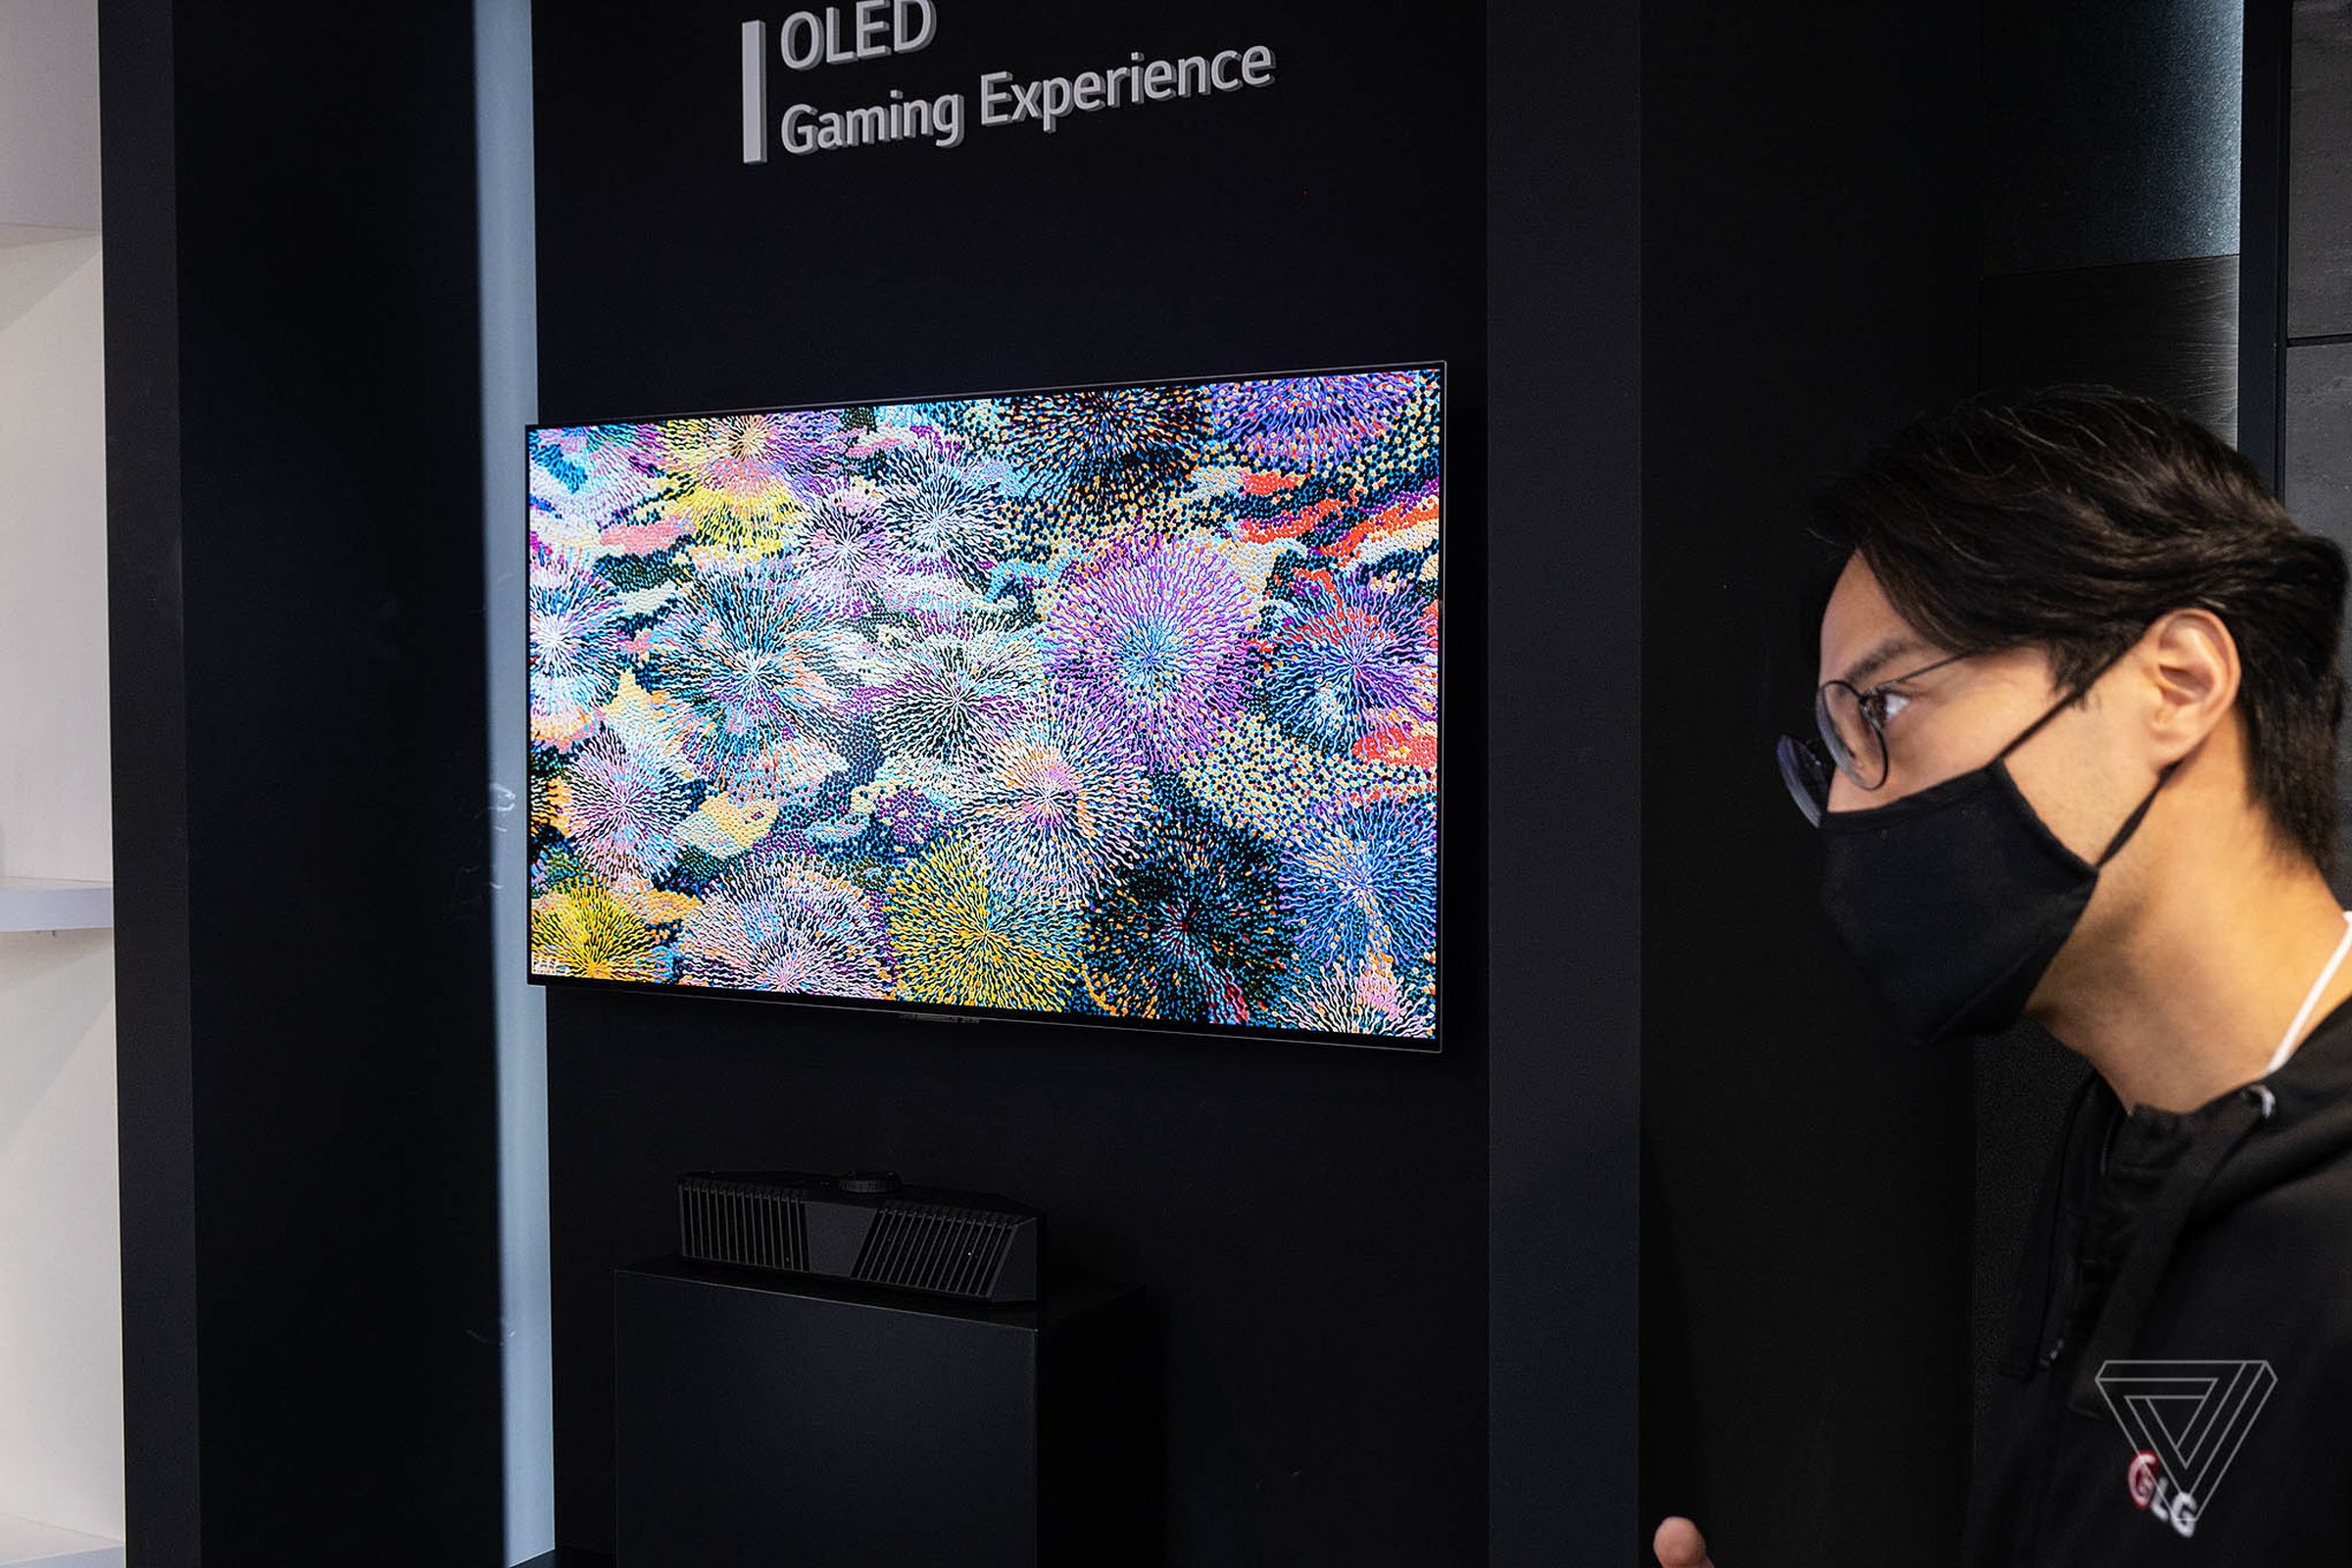 The 42-inch C2 4K OLED will cost $1,399.